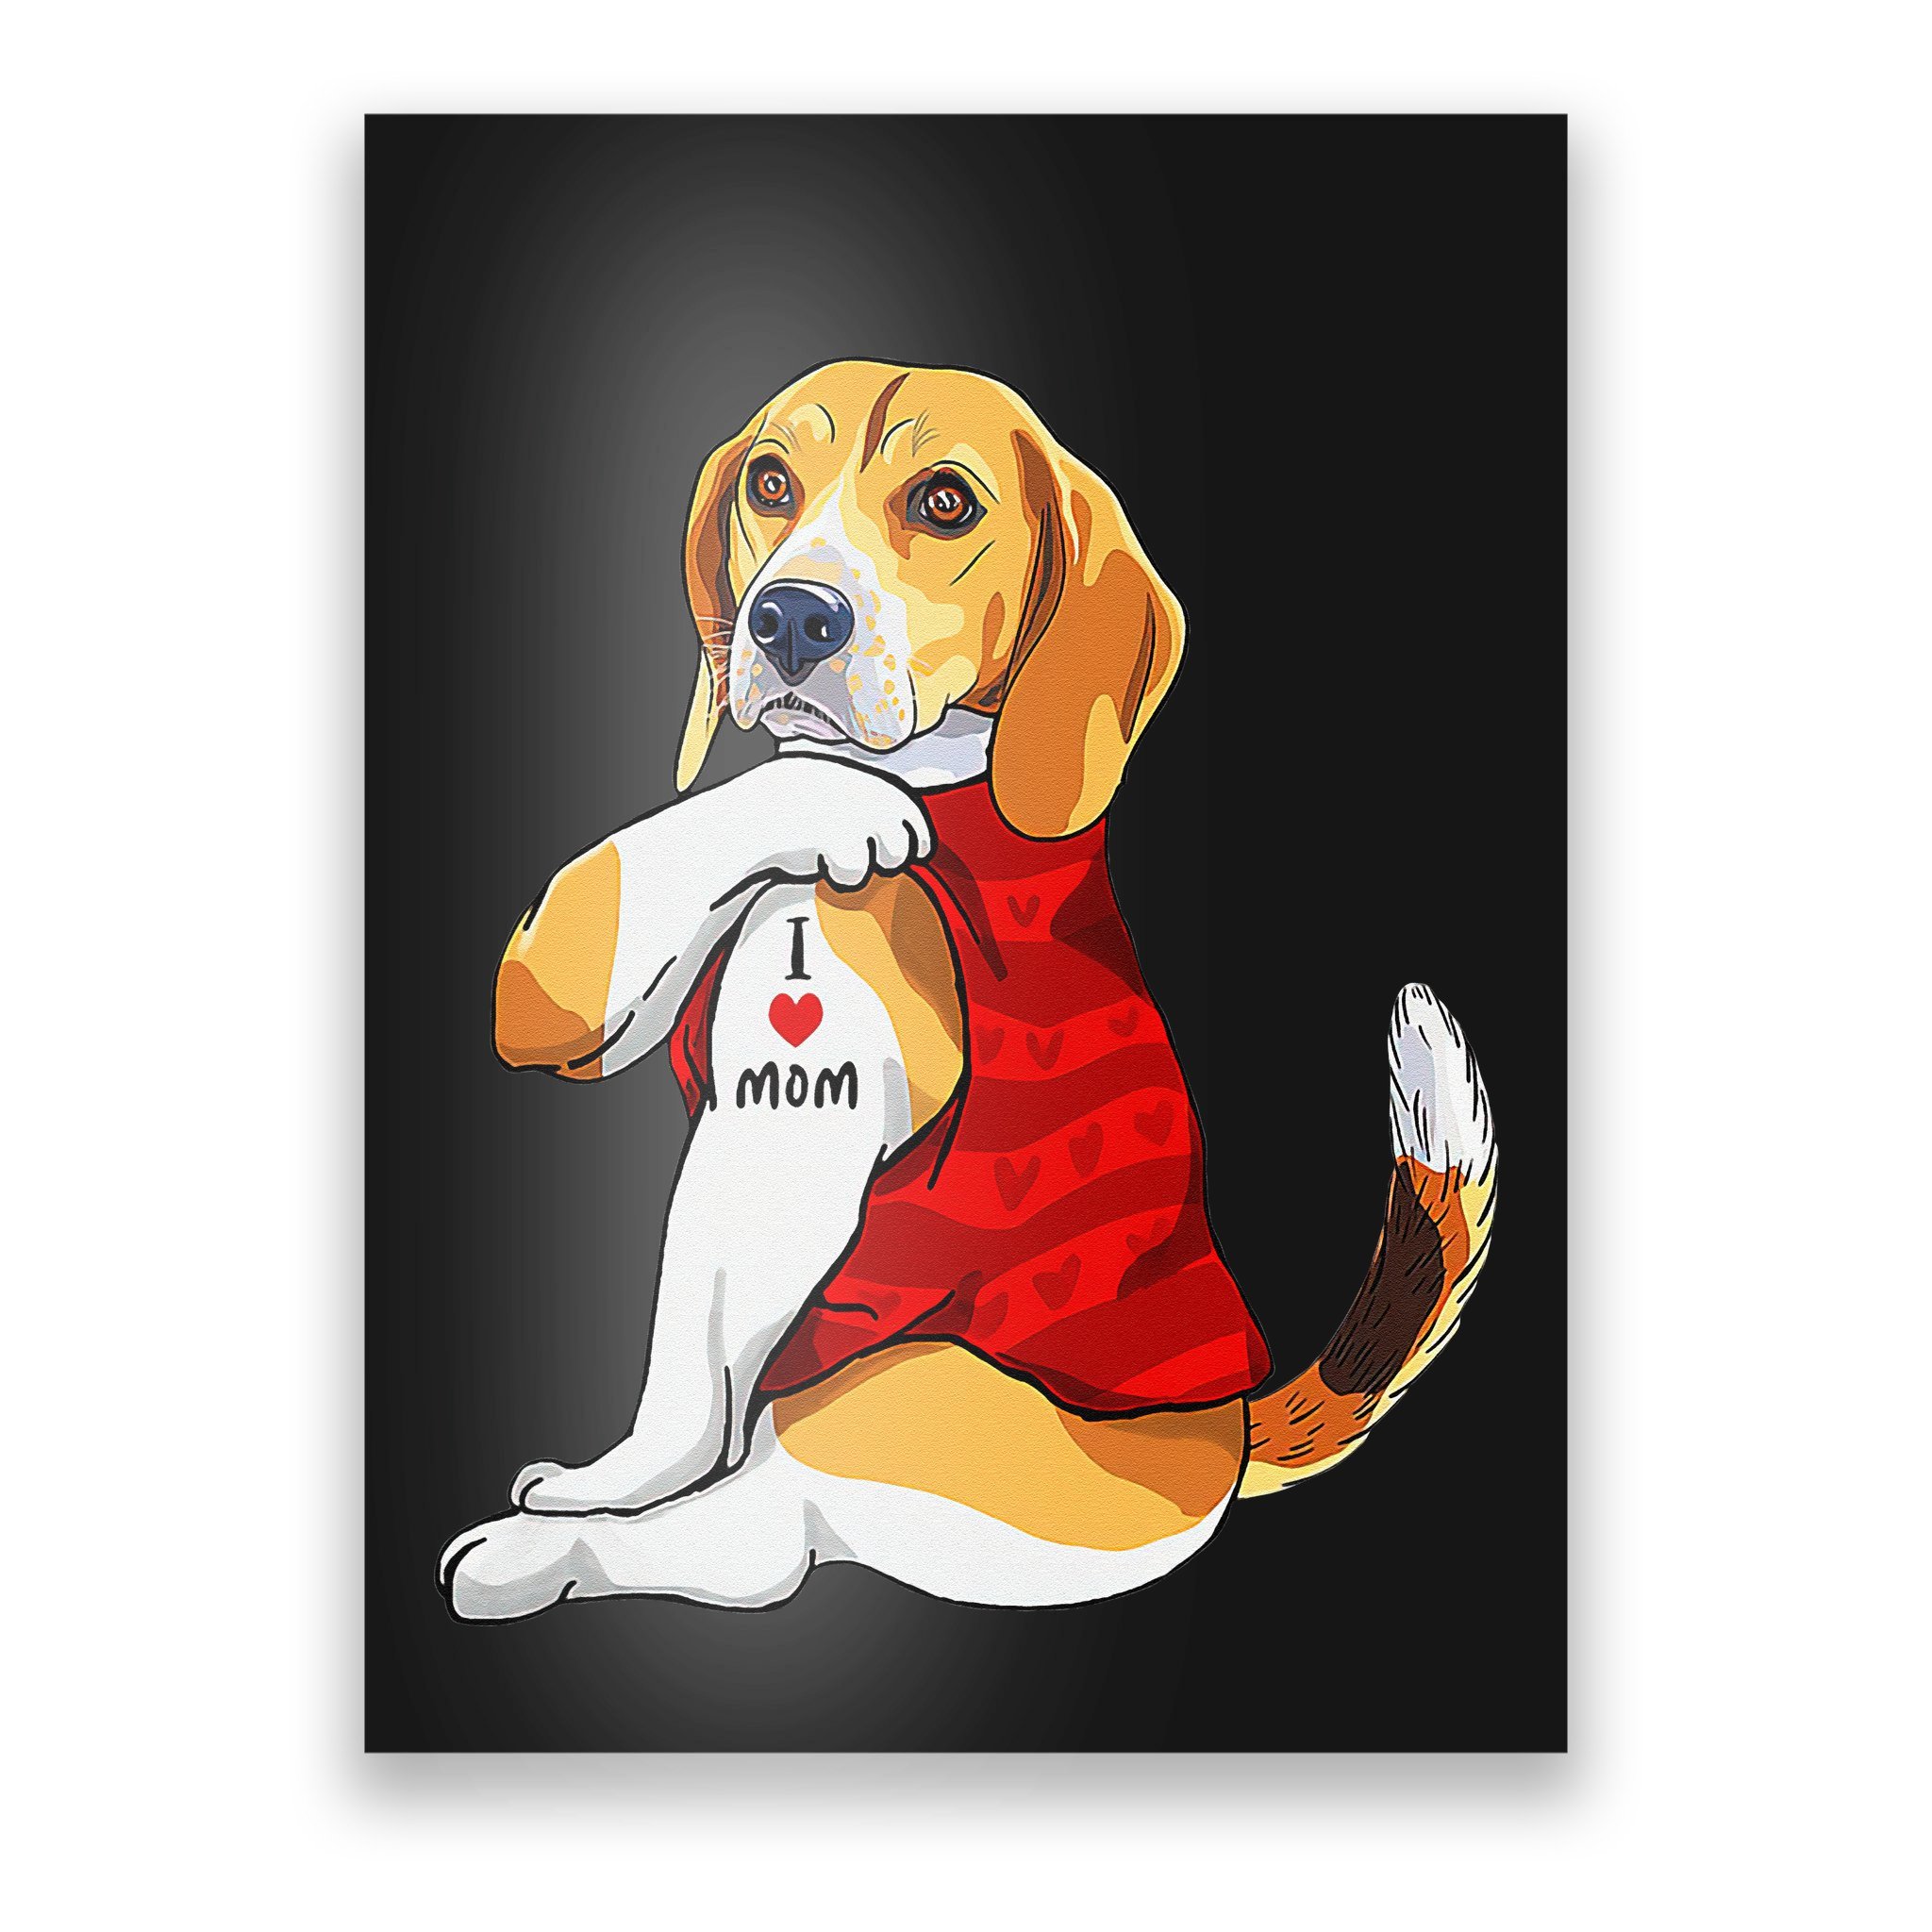 Share more than 167 beagle tattoo best